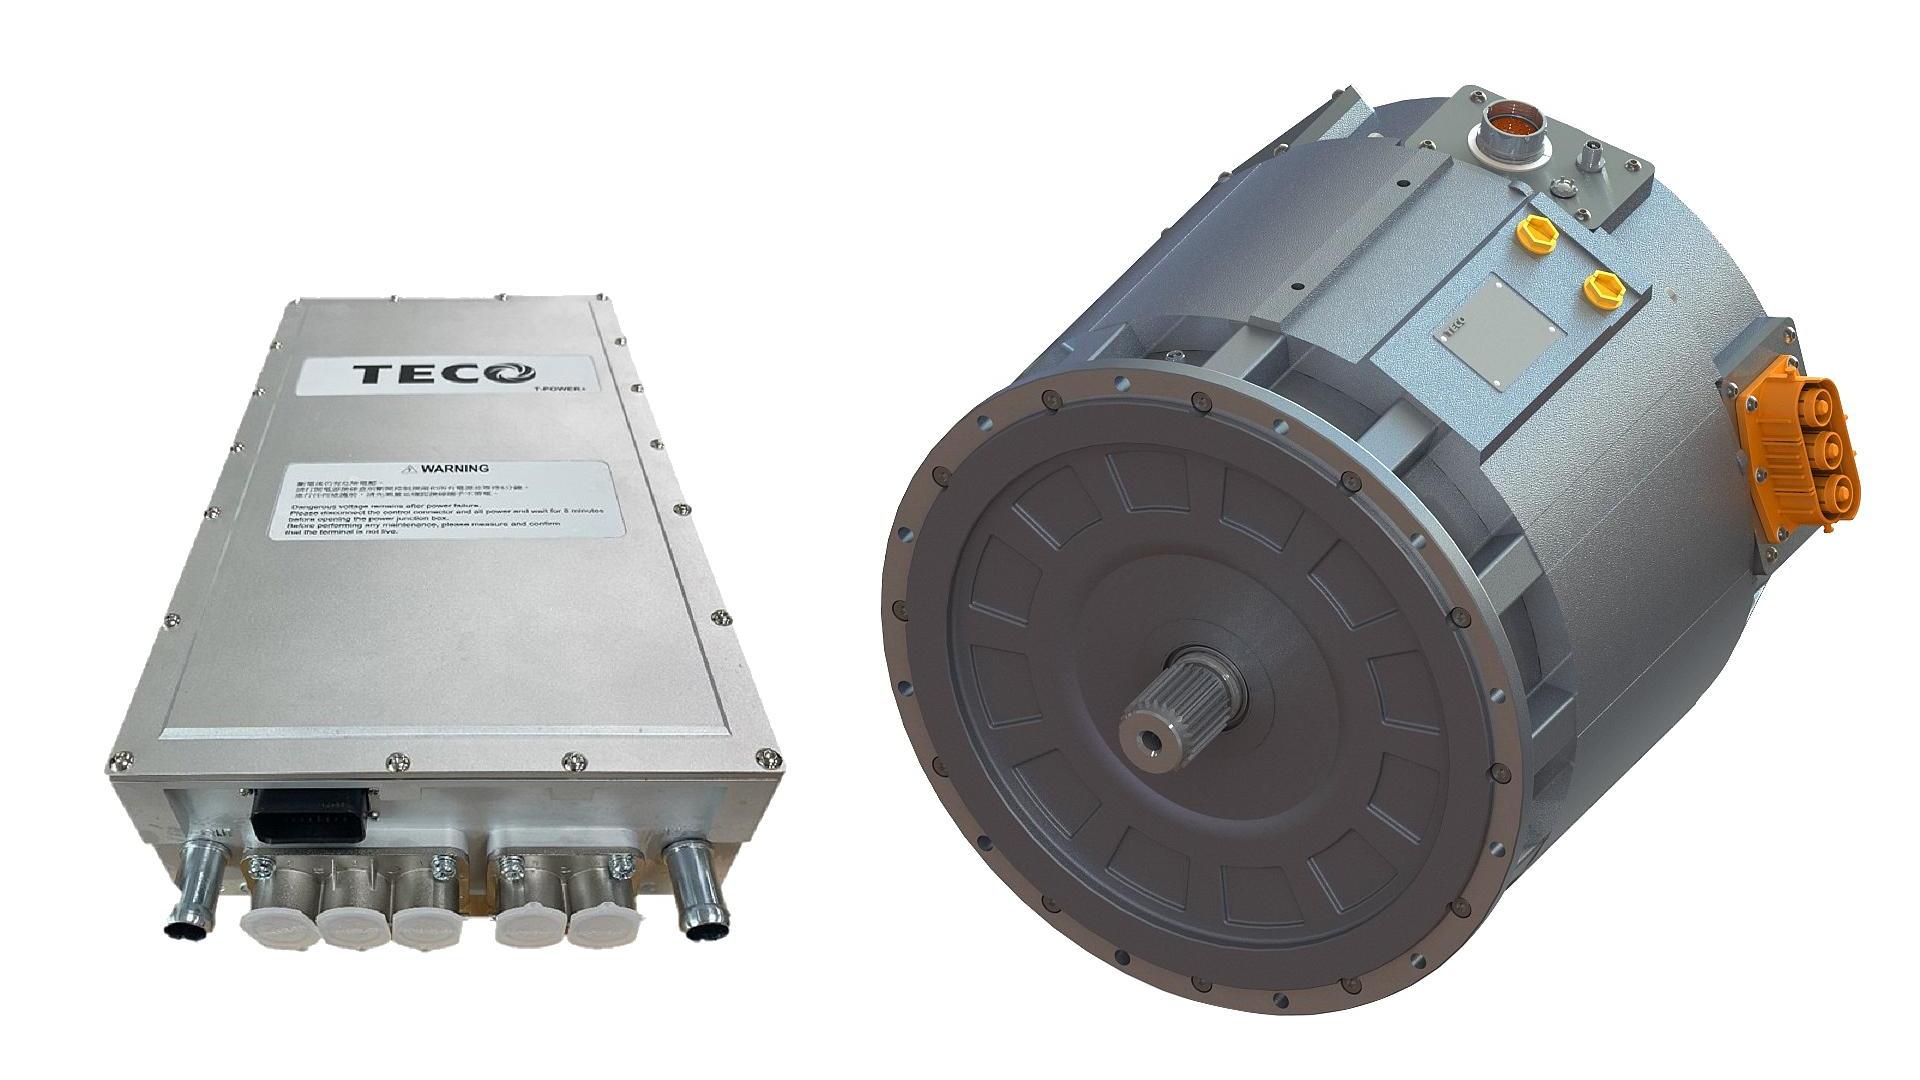 High Power and High Voltage e-Powertrain for EVs